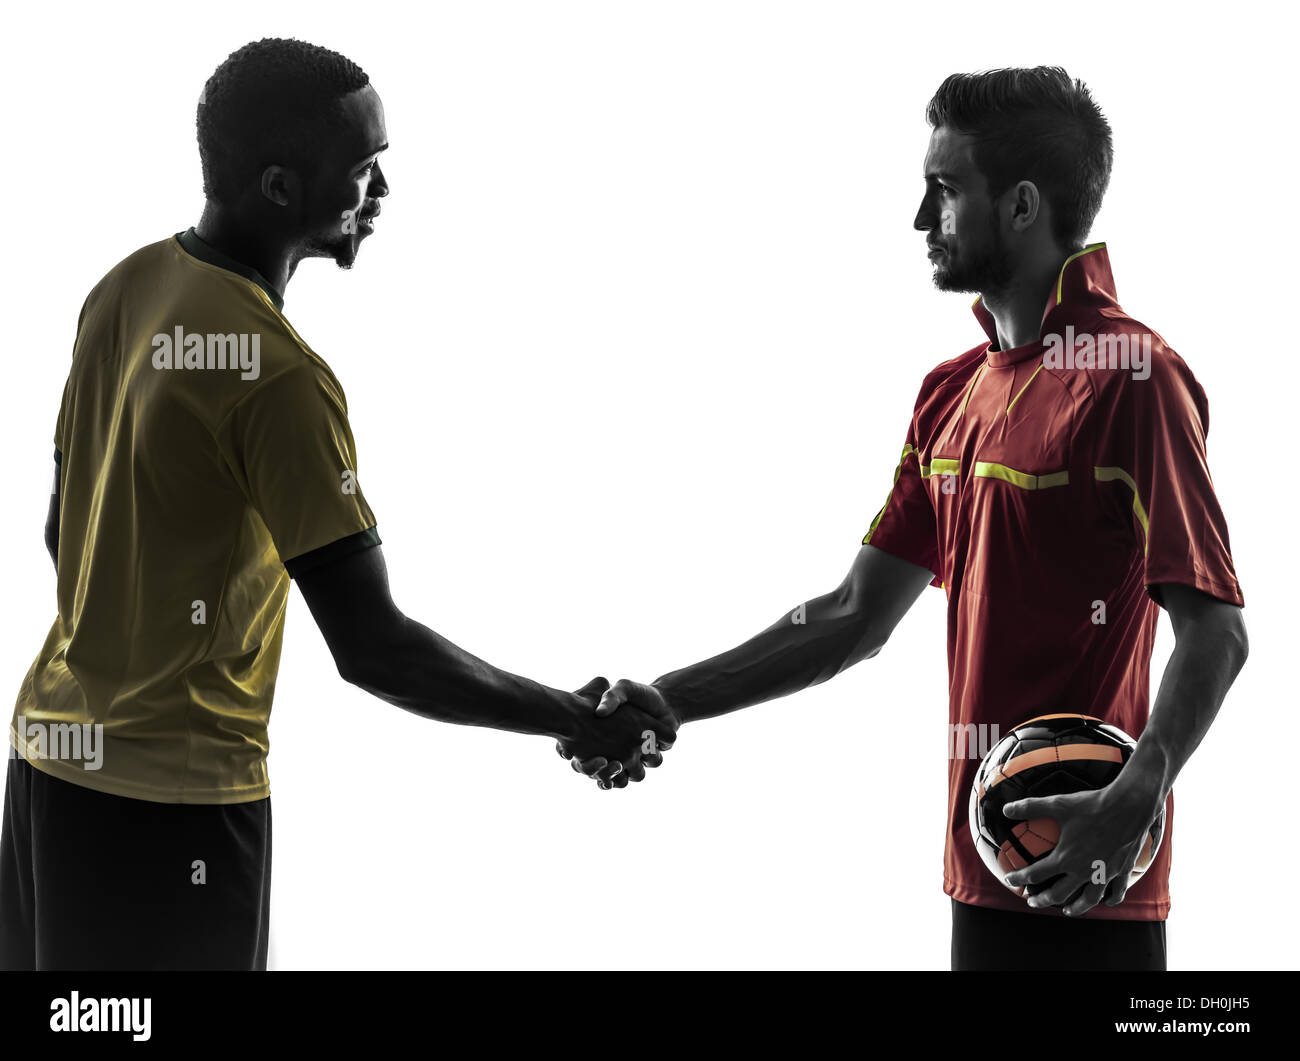 two men soccer player playing football competition handshake handshaking in silhouette on white background Stock Photo